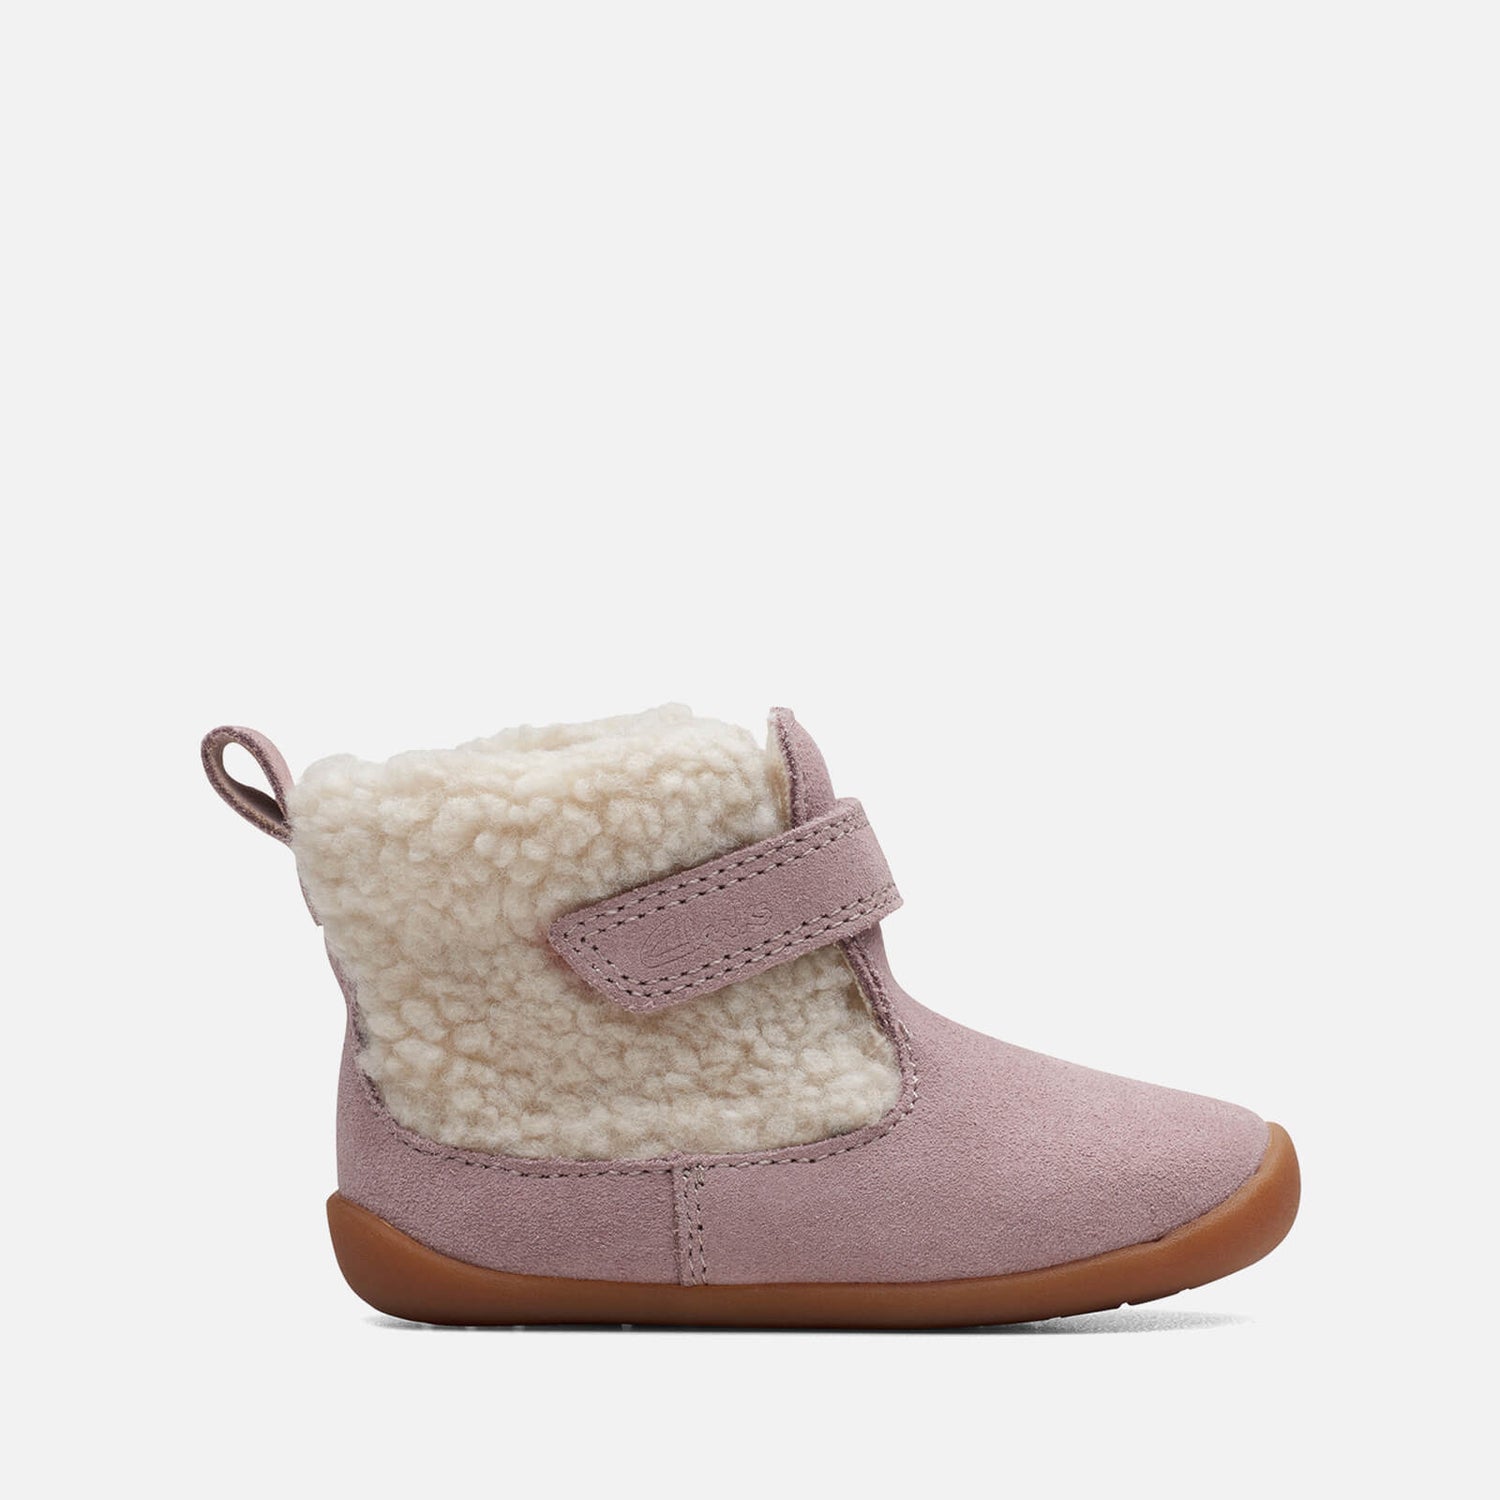 Clarks Toddlers Roamer Moon Suede and Faux Fur Boots - UK 4 Baby